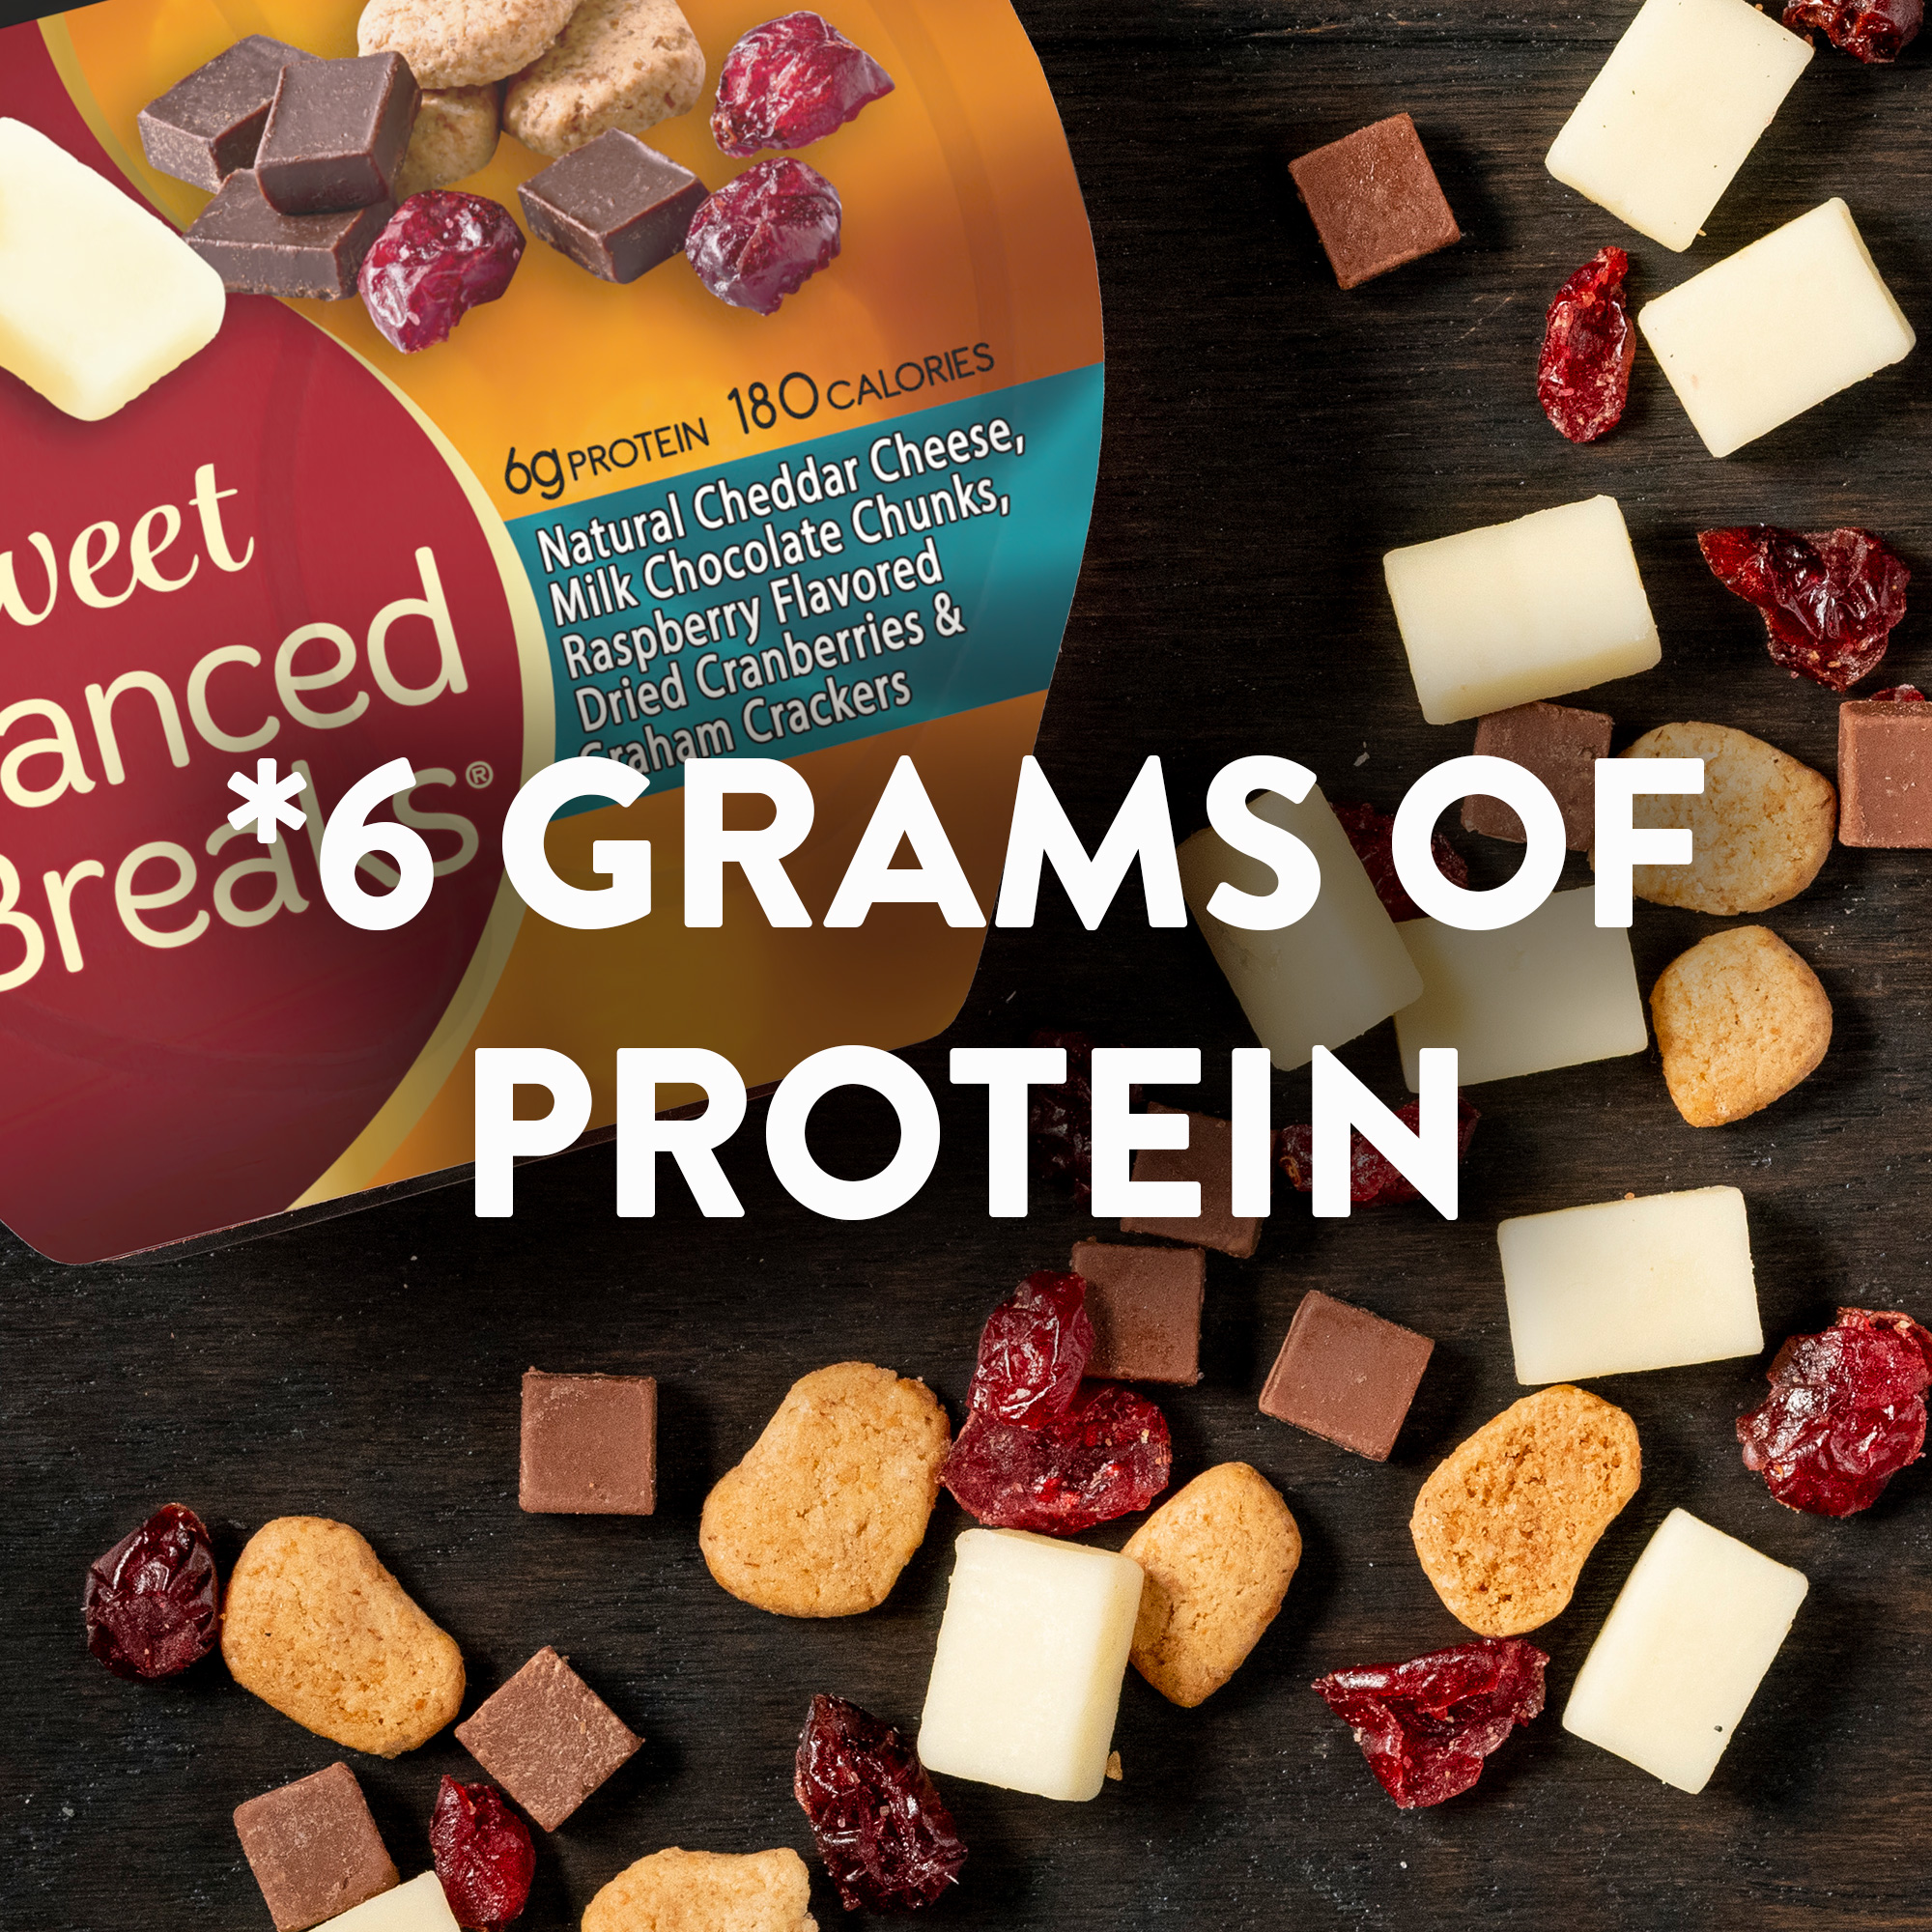 Sweet Balanced Breaks® Natural Cheddar Cheese with Chocolate Chunks, Raspberry Flavored Dried Cranberries and Graham Crackers